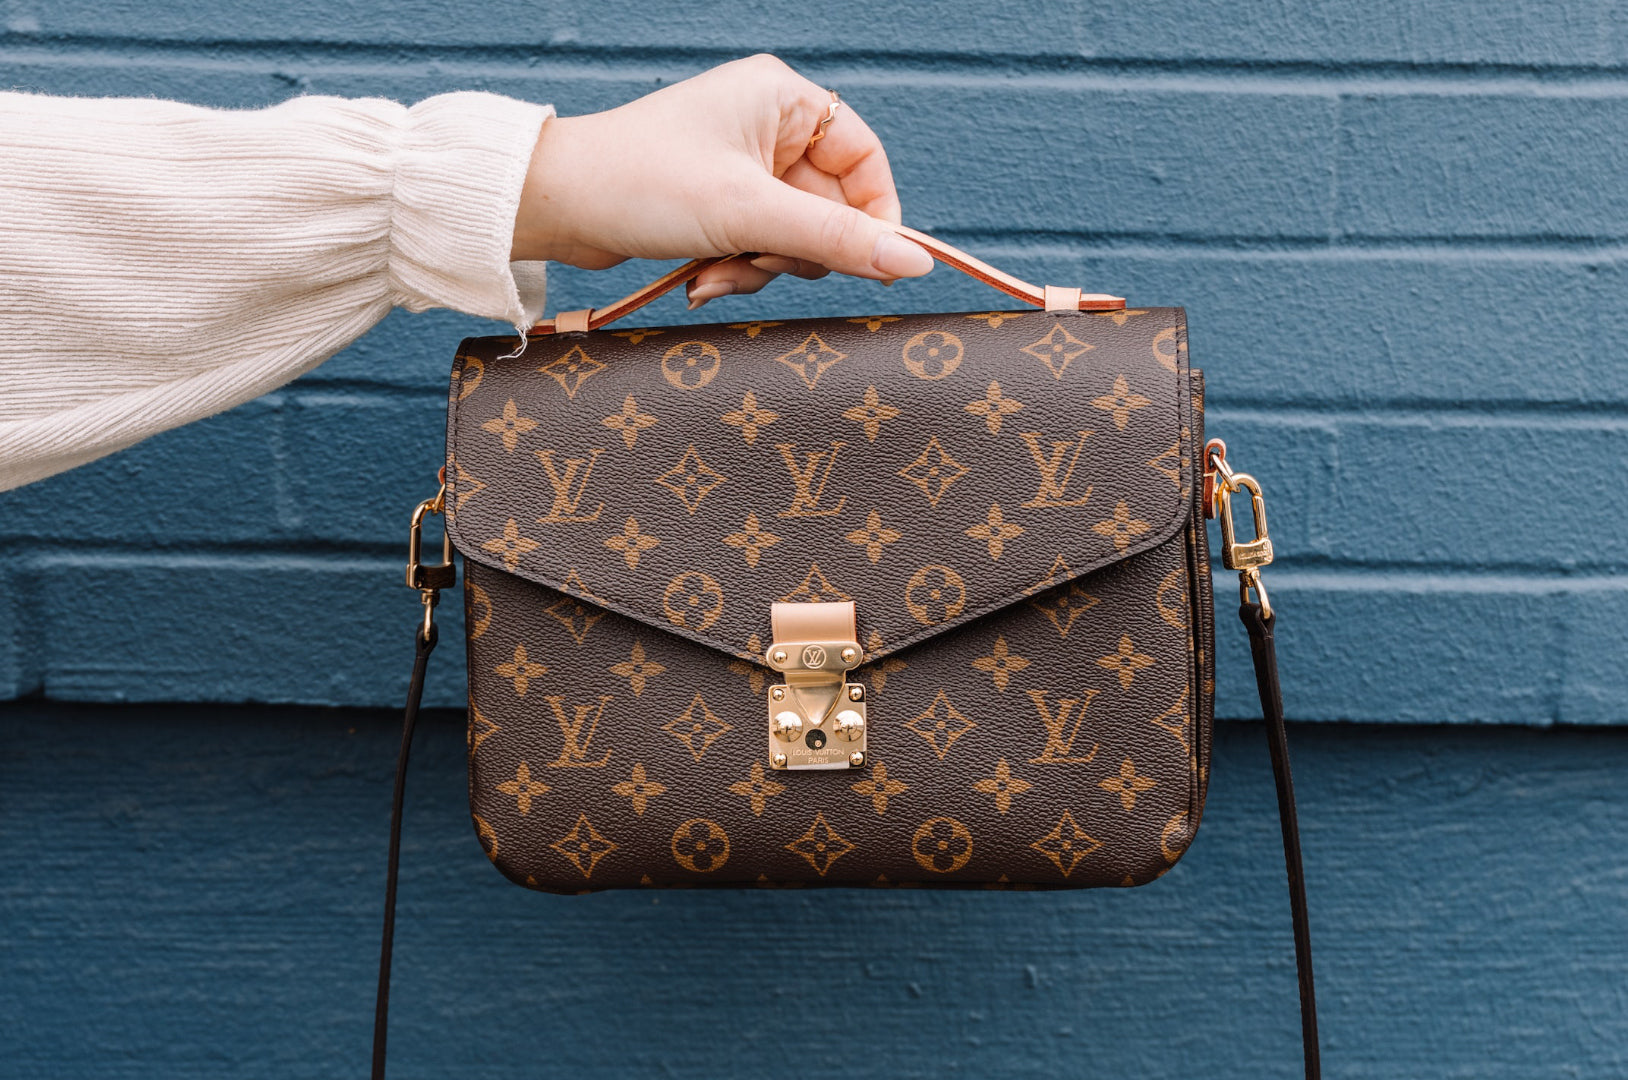 Preowned Louis Vuitton Alma BB: A Legacy That Lives On!